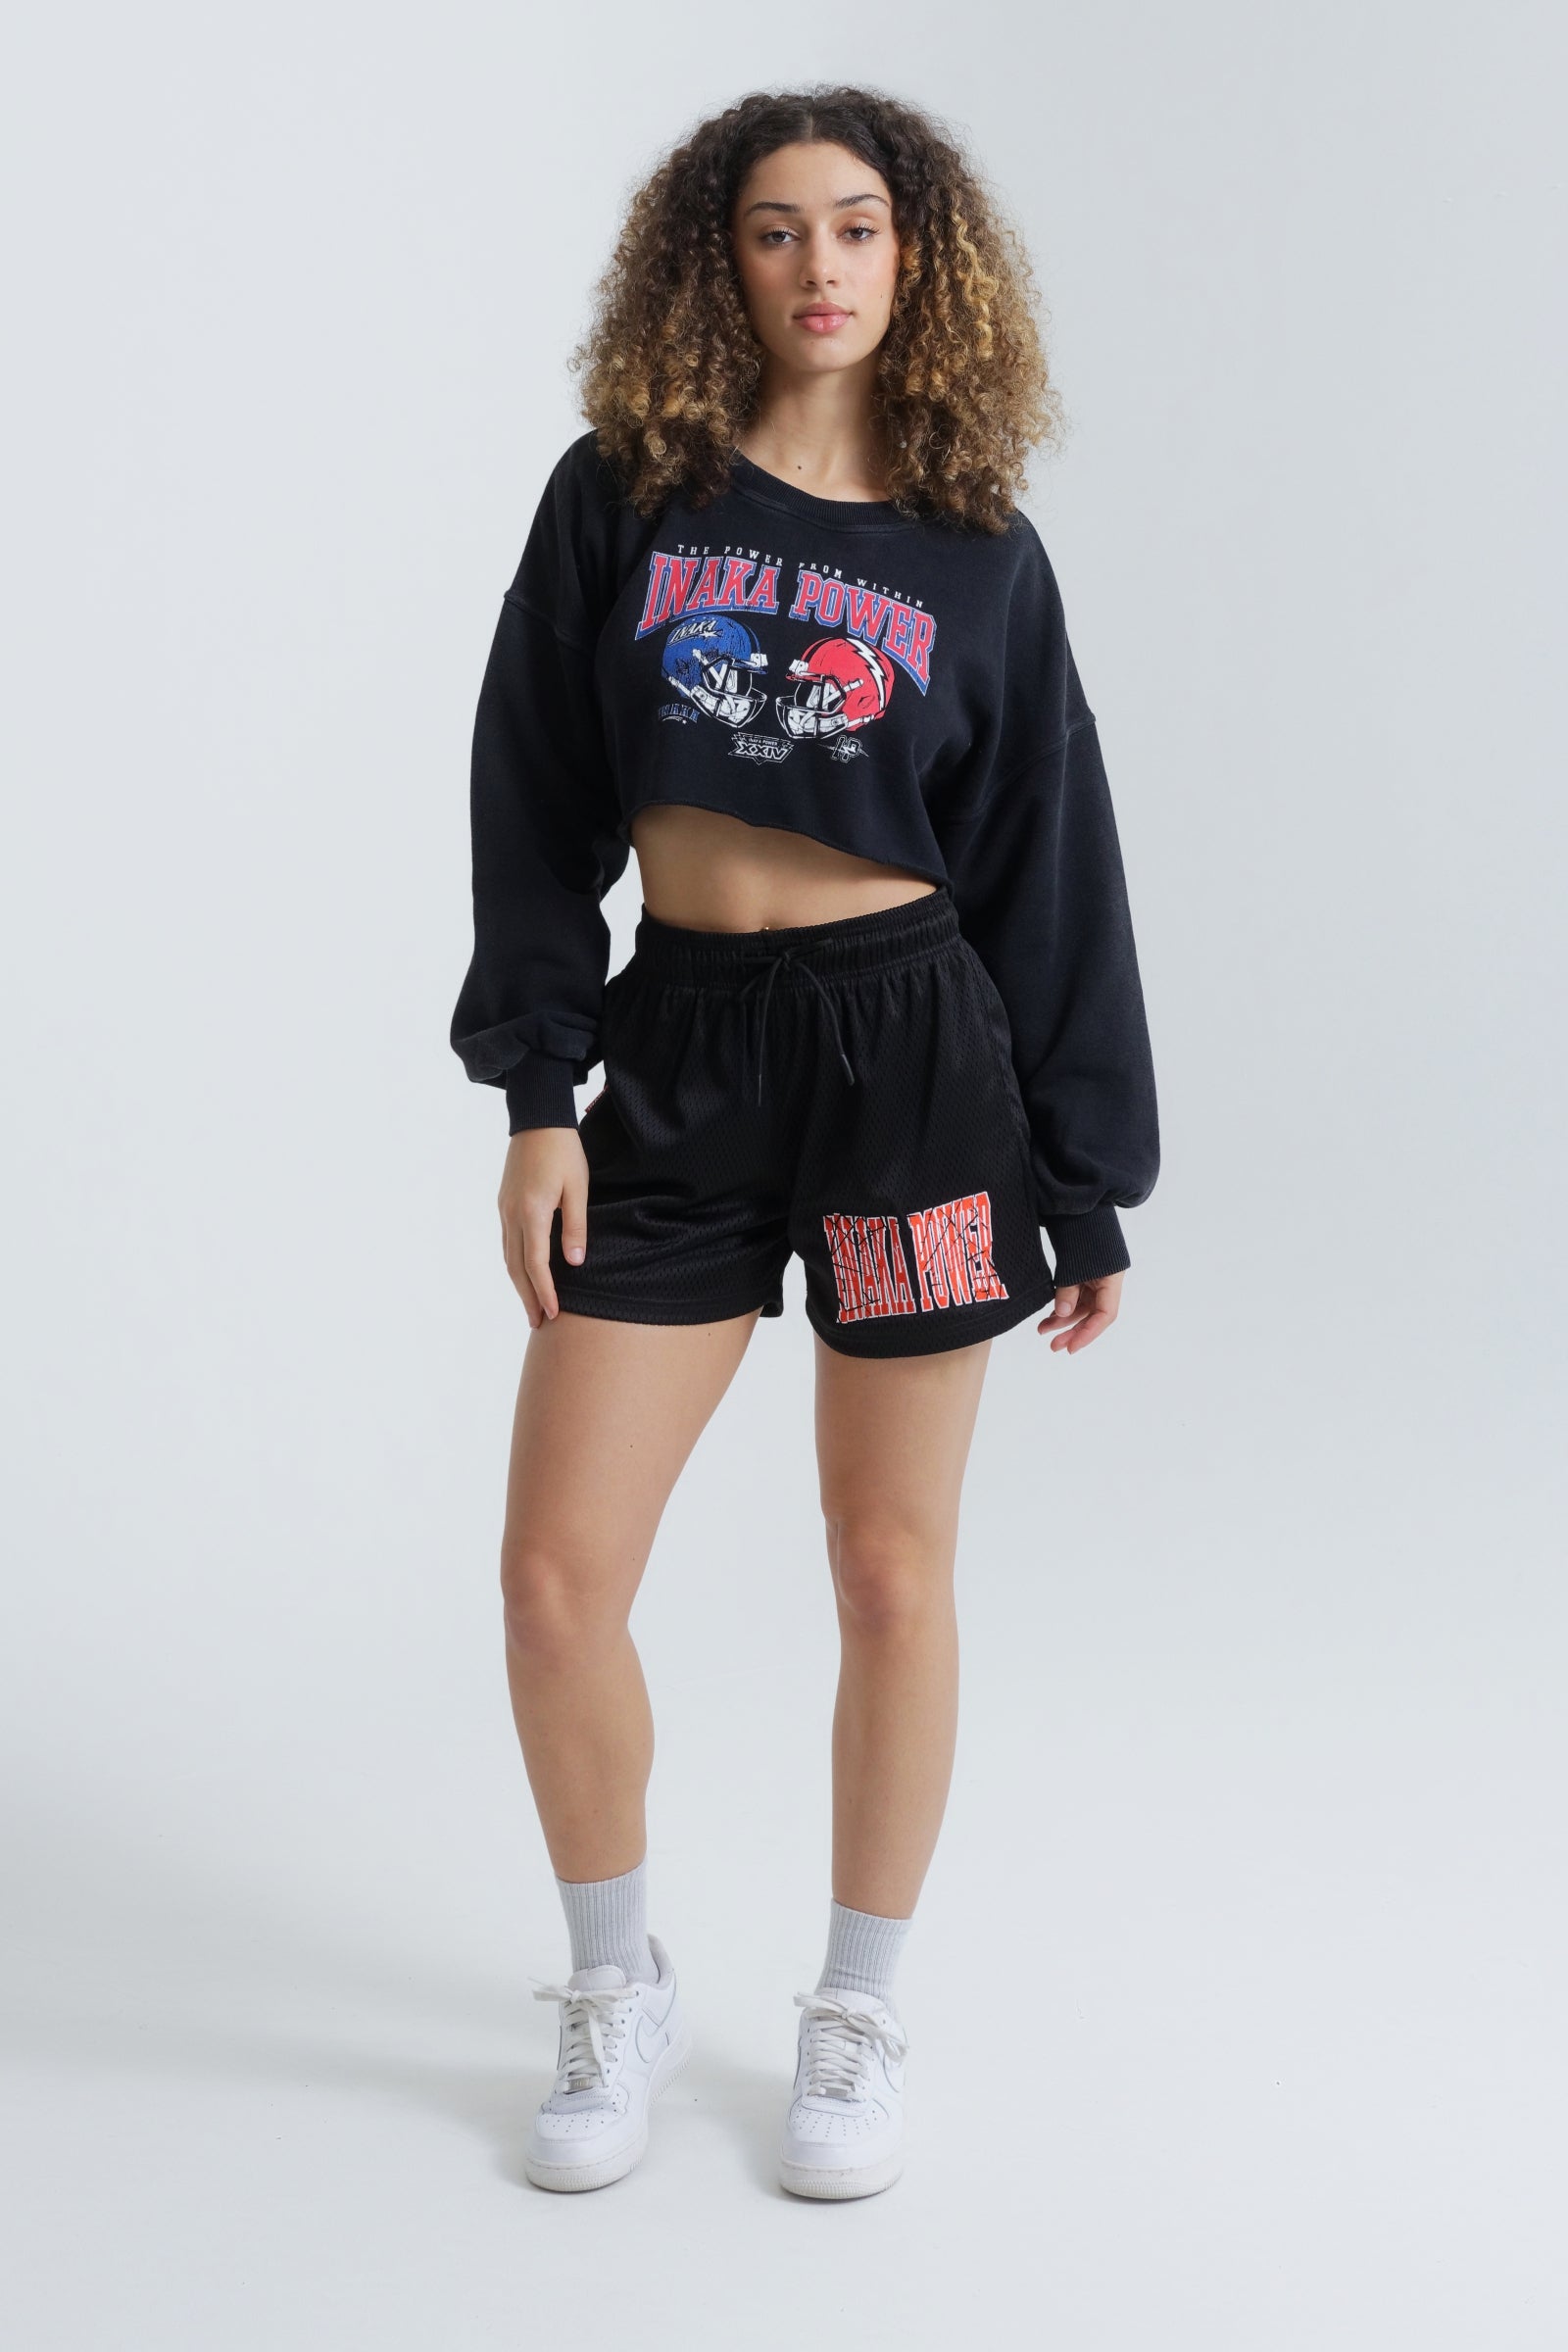 Women's Cropped Crewneck - Face-off